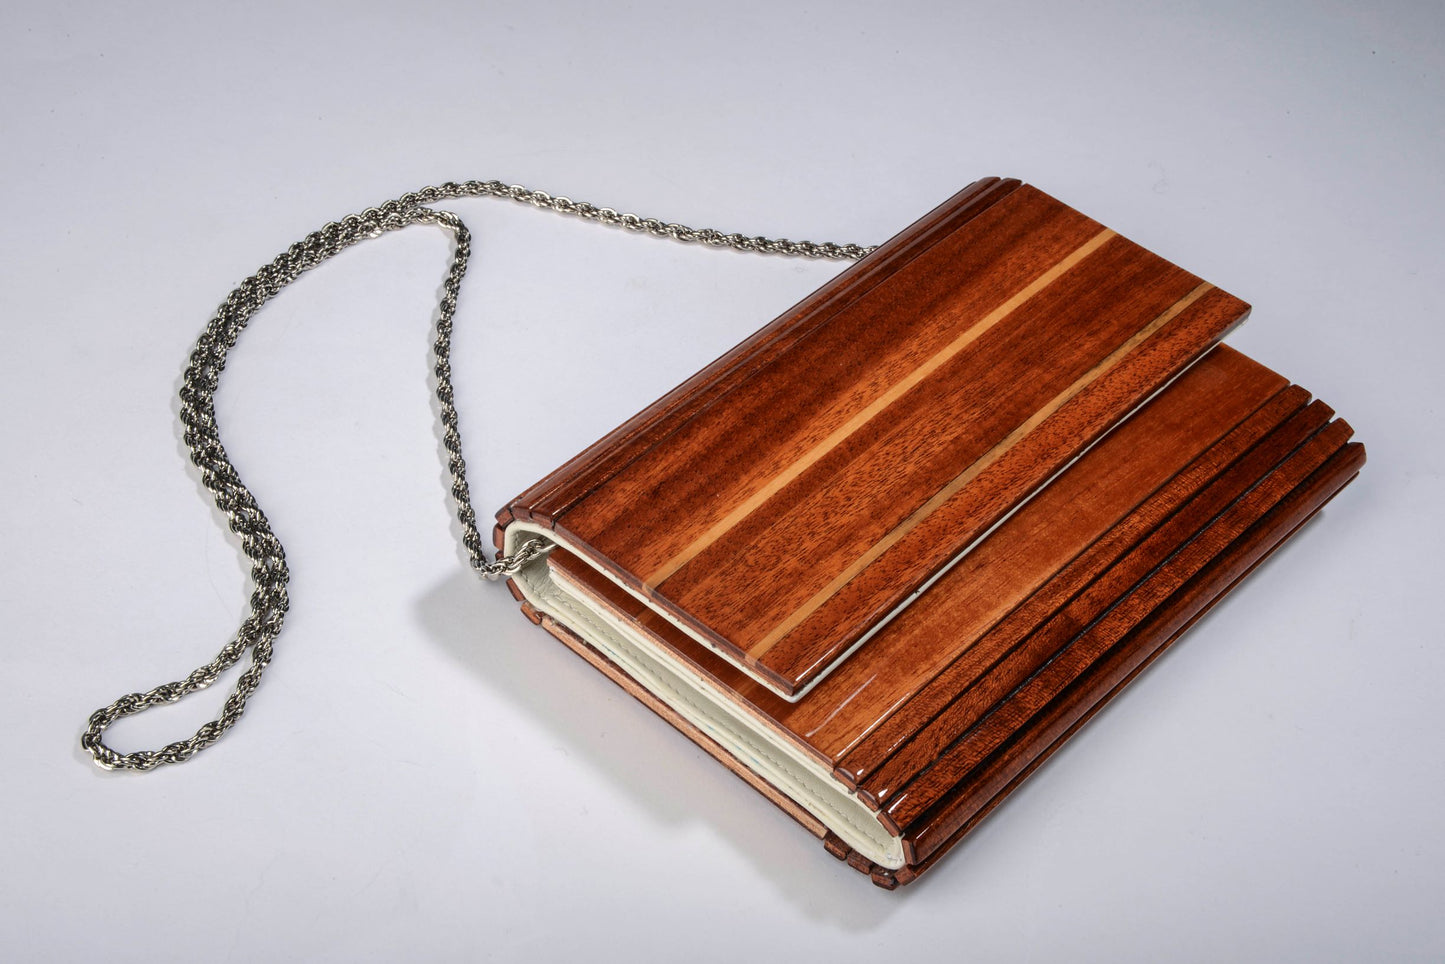 LUXURY WOOD CLUTCH BAGS D-MADERA